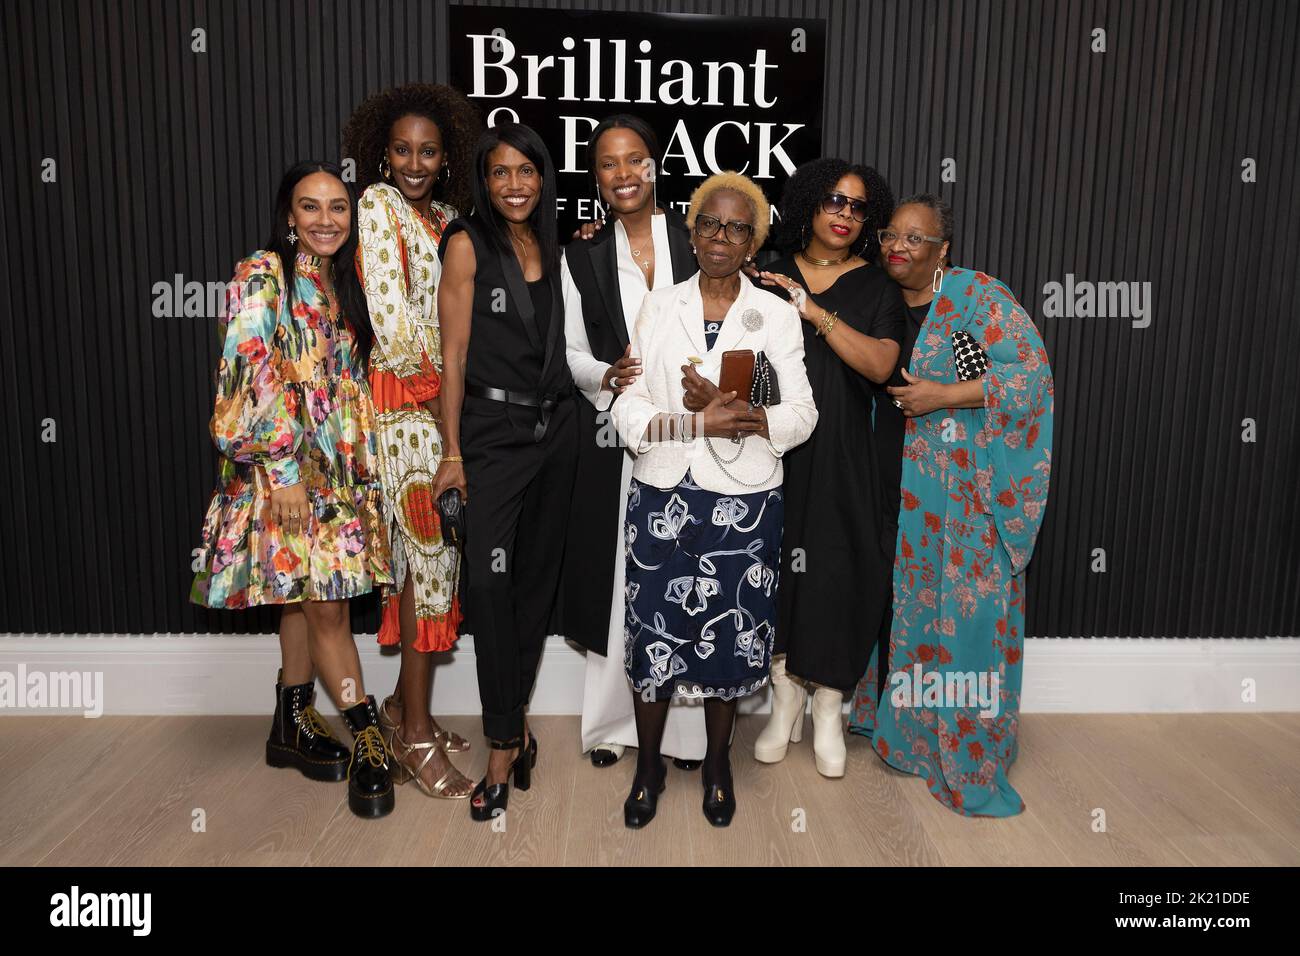 (left to right) Maggi Simpson, Sewit Sium, Gina Love, Vania Leles, Jariet Oloyé, Lorraine West and Karen Smith attend the launch of Brilliant and Black, a new selling exhibition showcasing specially commissioned jewellery by black designers, at Sotheby's in London Picture date: Wednesday September 21, 2022. Stock Photo